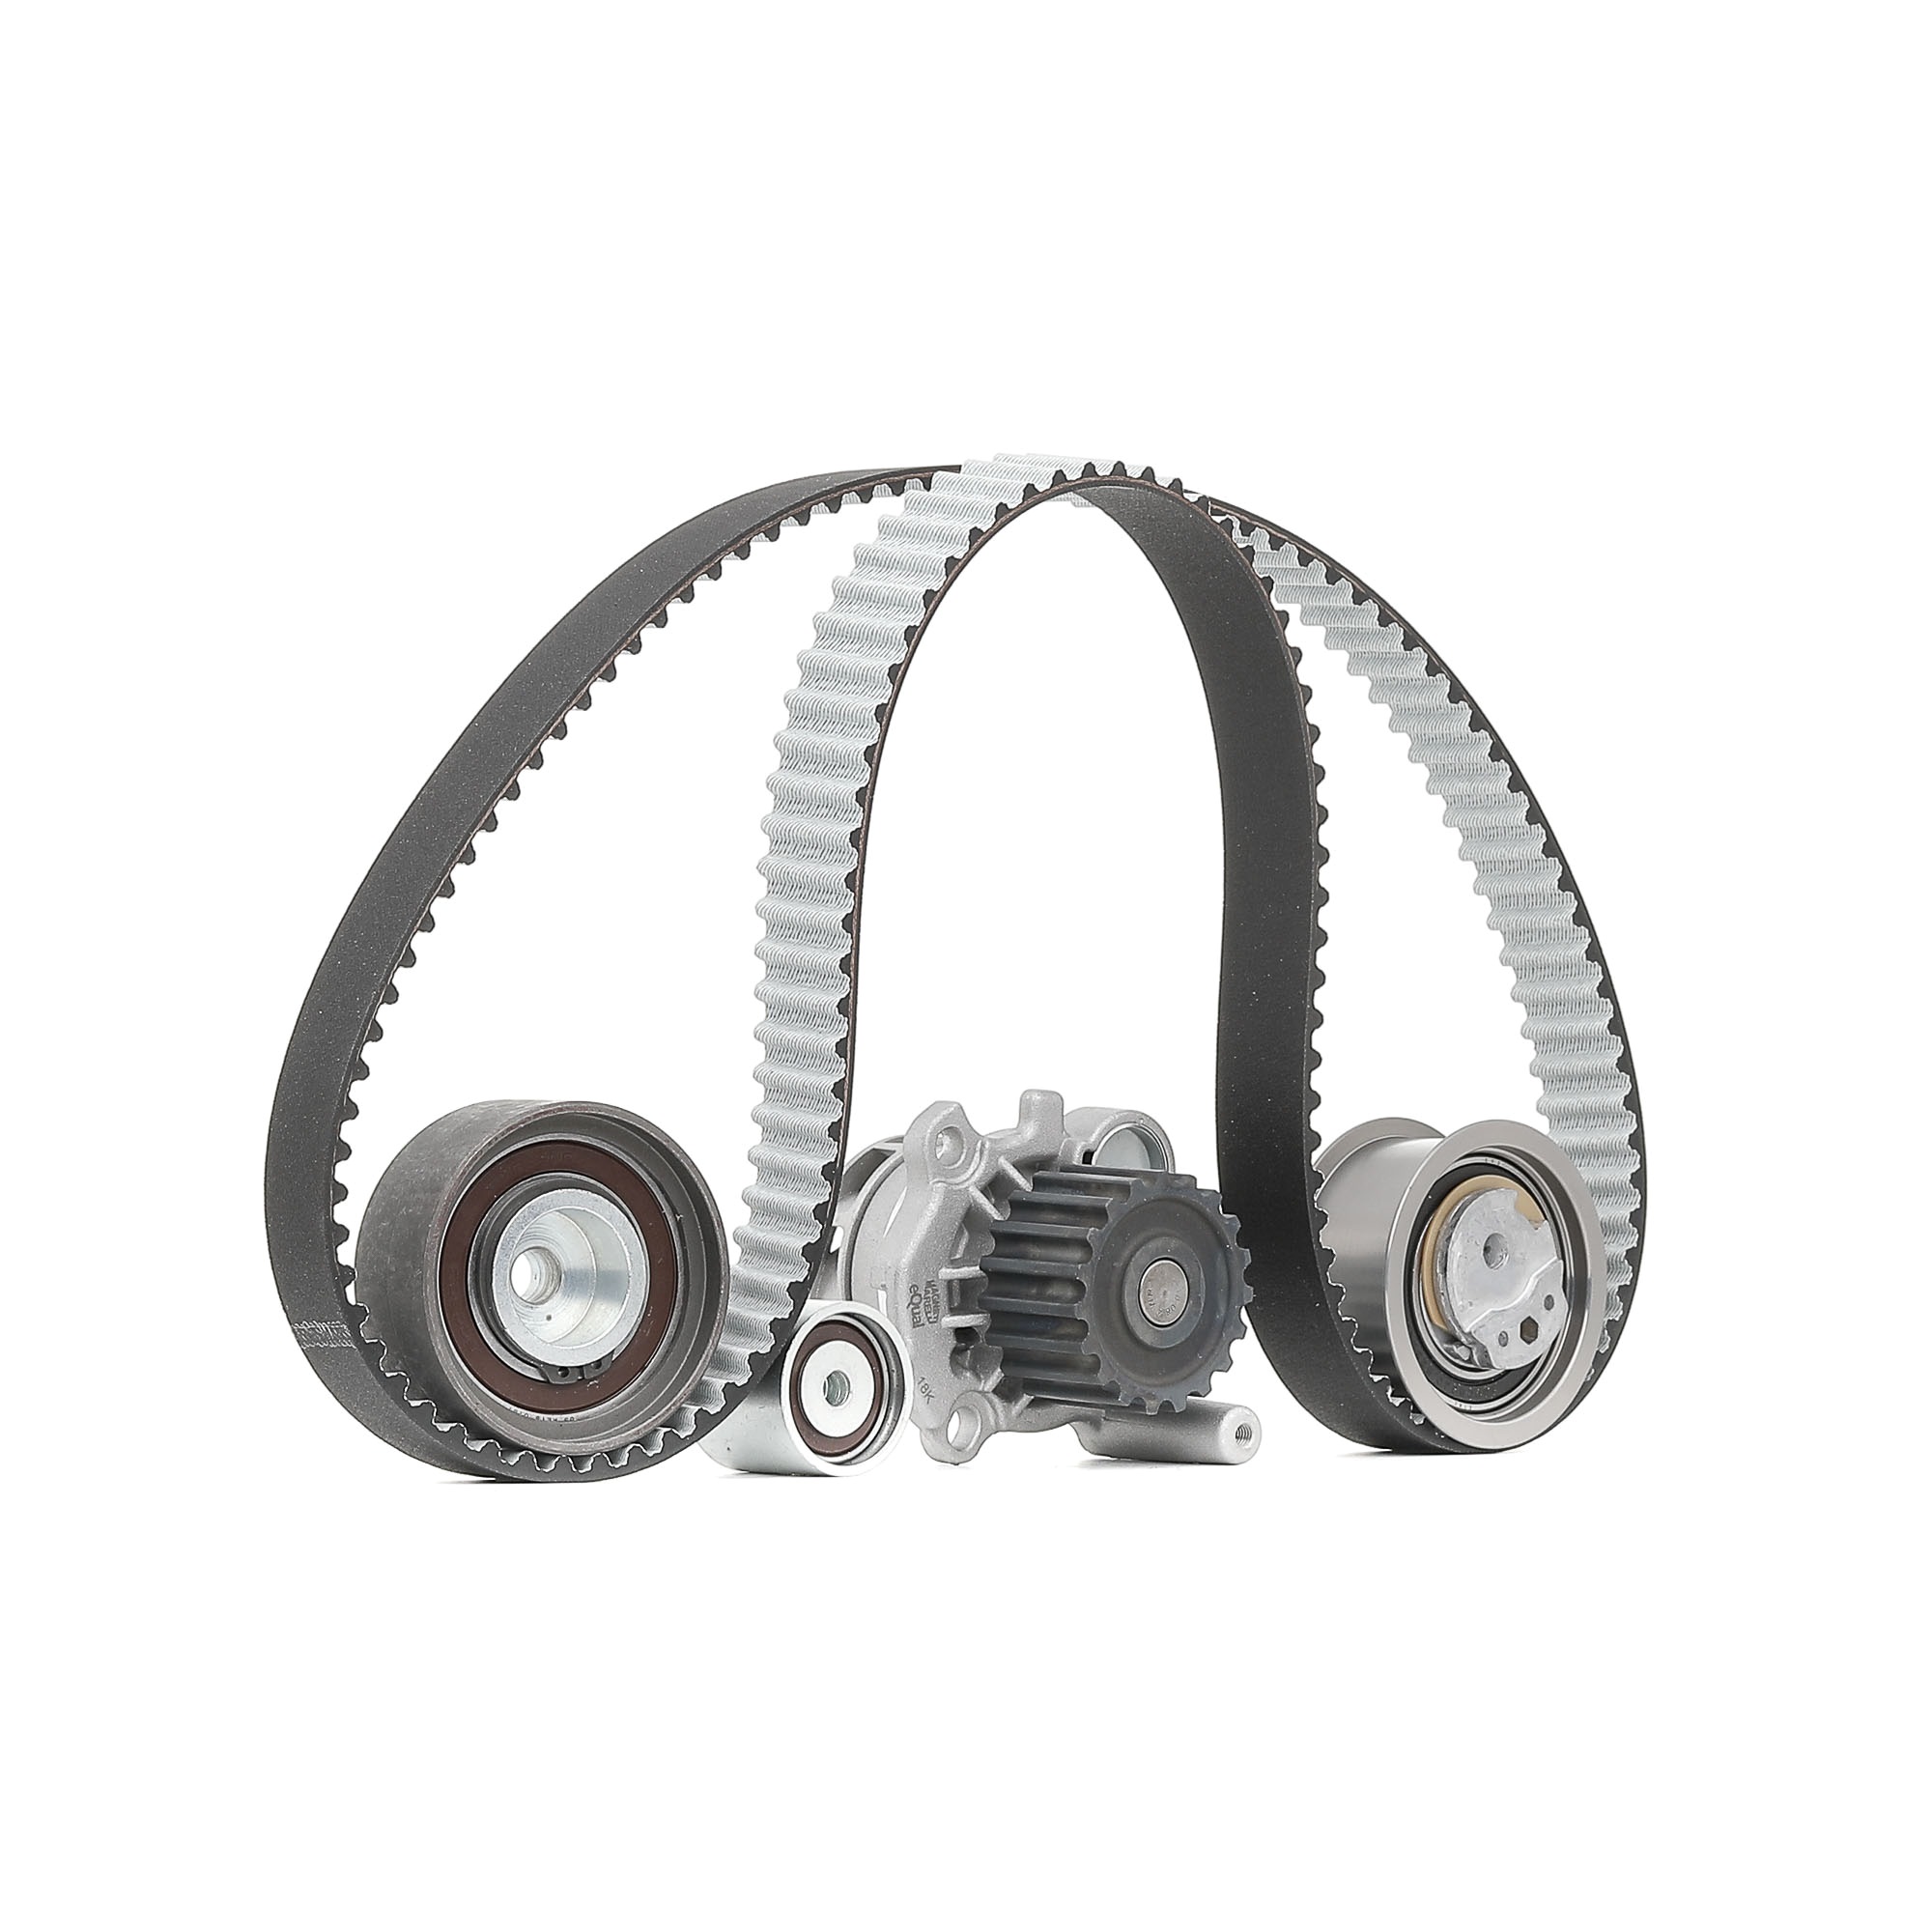 MAGNETI MARELLI 132011160068 Water pump and timing belt kit Number of Teeth: 141 L: 1343 mm, Width: 30 mm